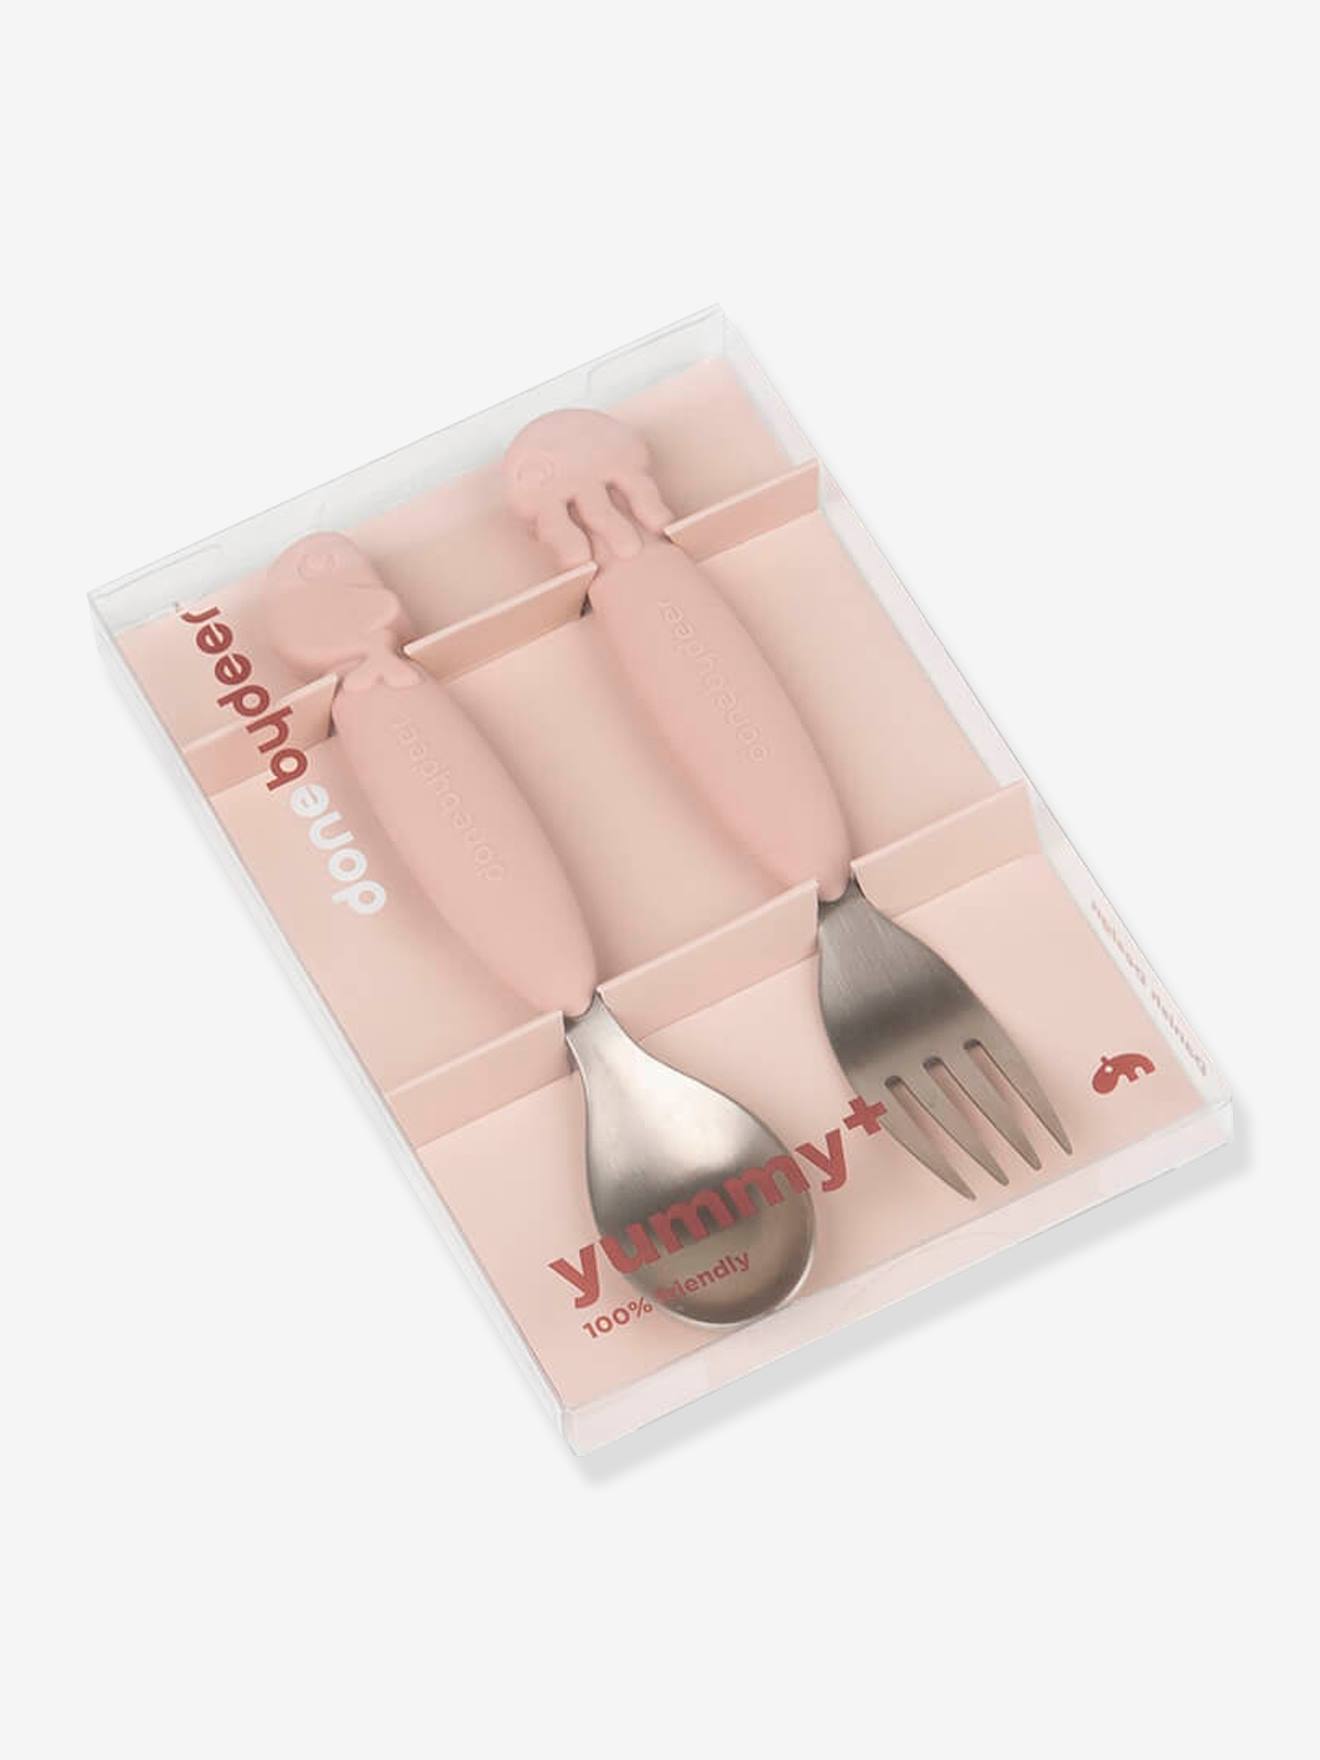 YummyPlus Sea Friends 2-Piece Cutlery Set, by DONE BY DEER pink light solid